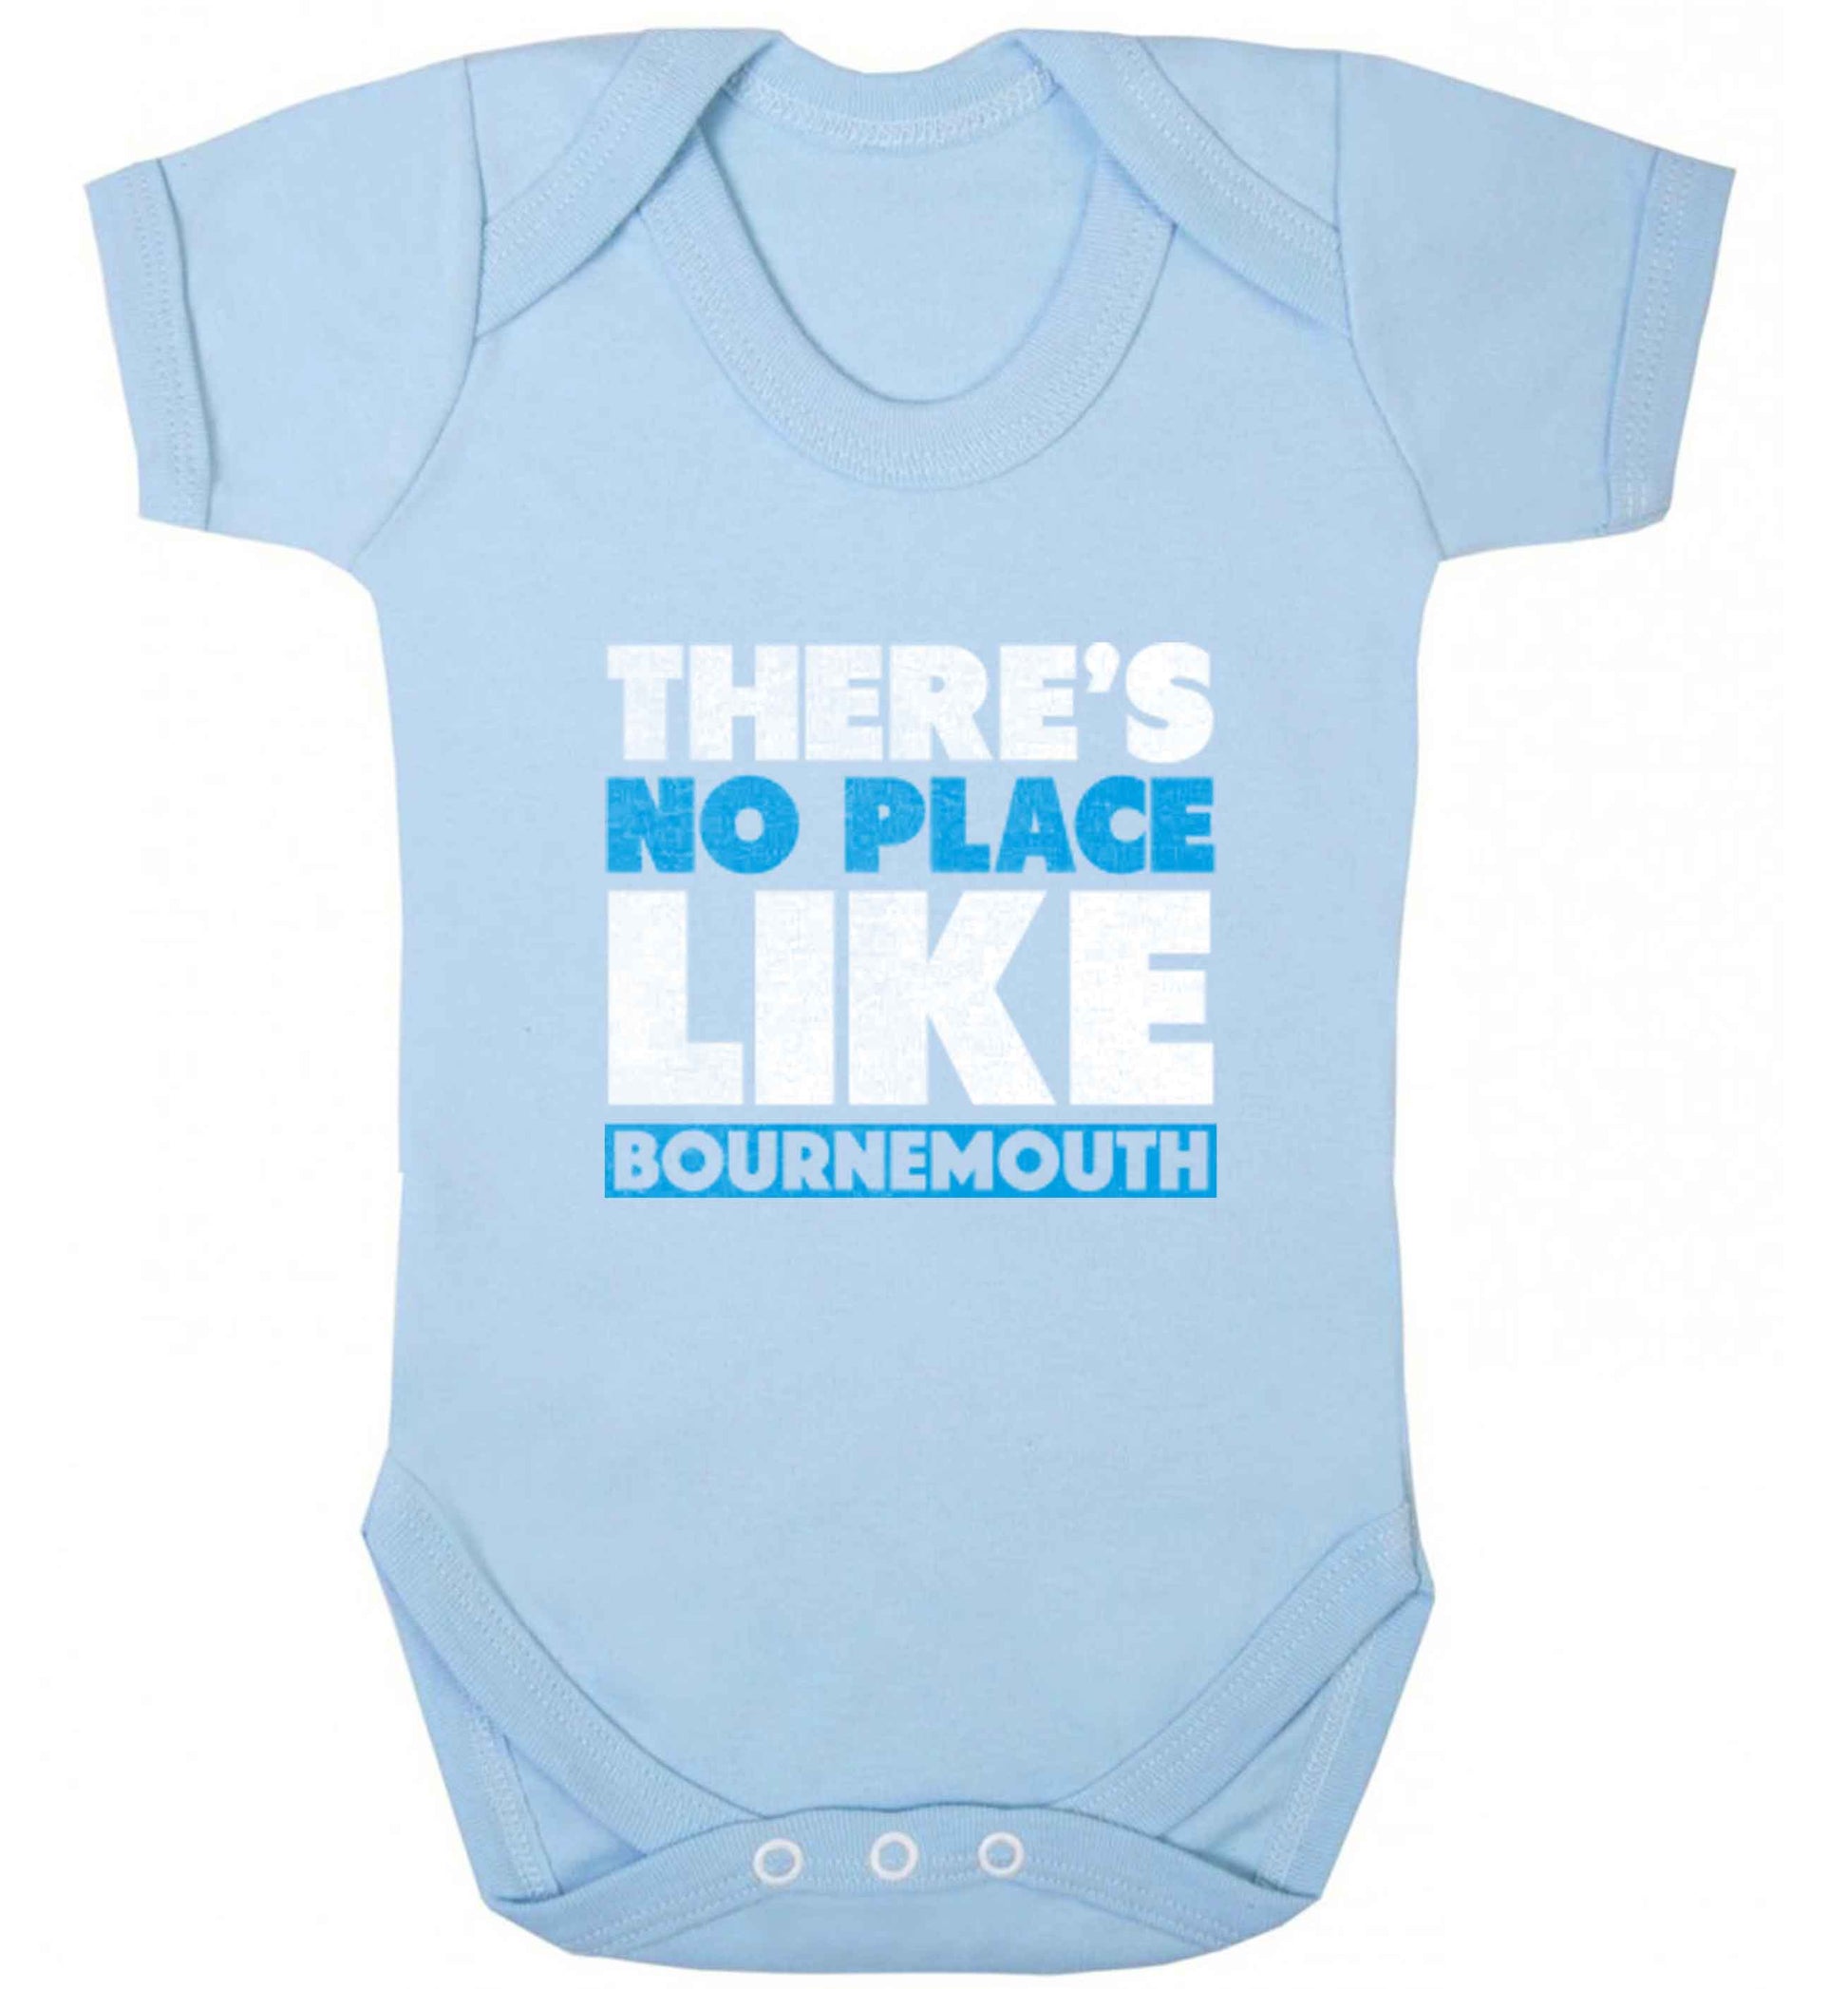 There's no place like Bournemouth baby vest pale blue 18-24 months